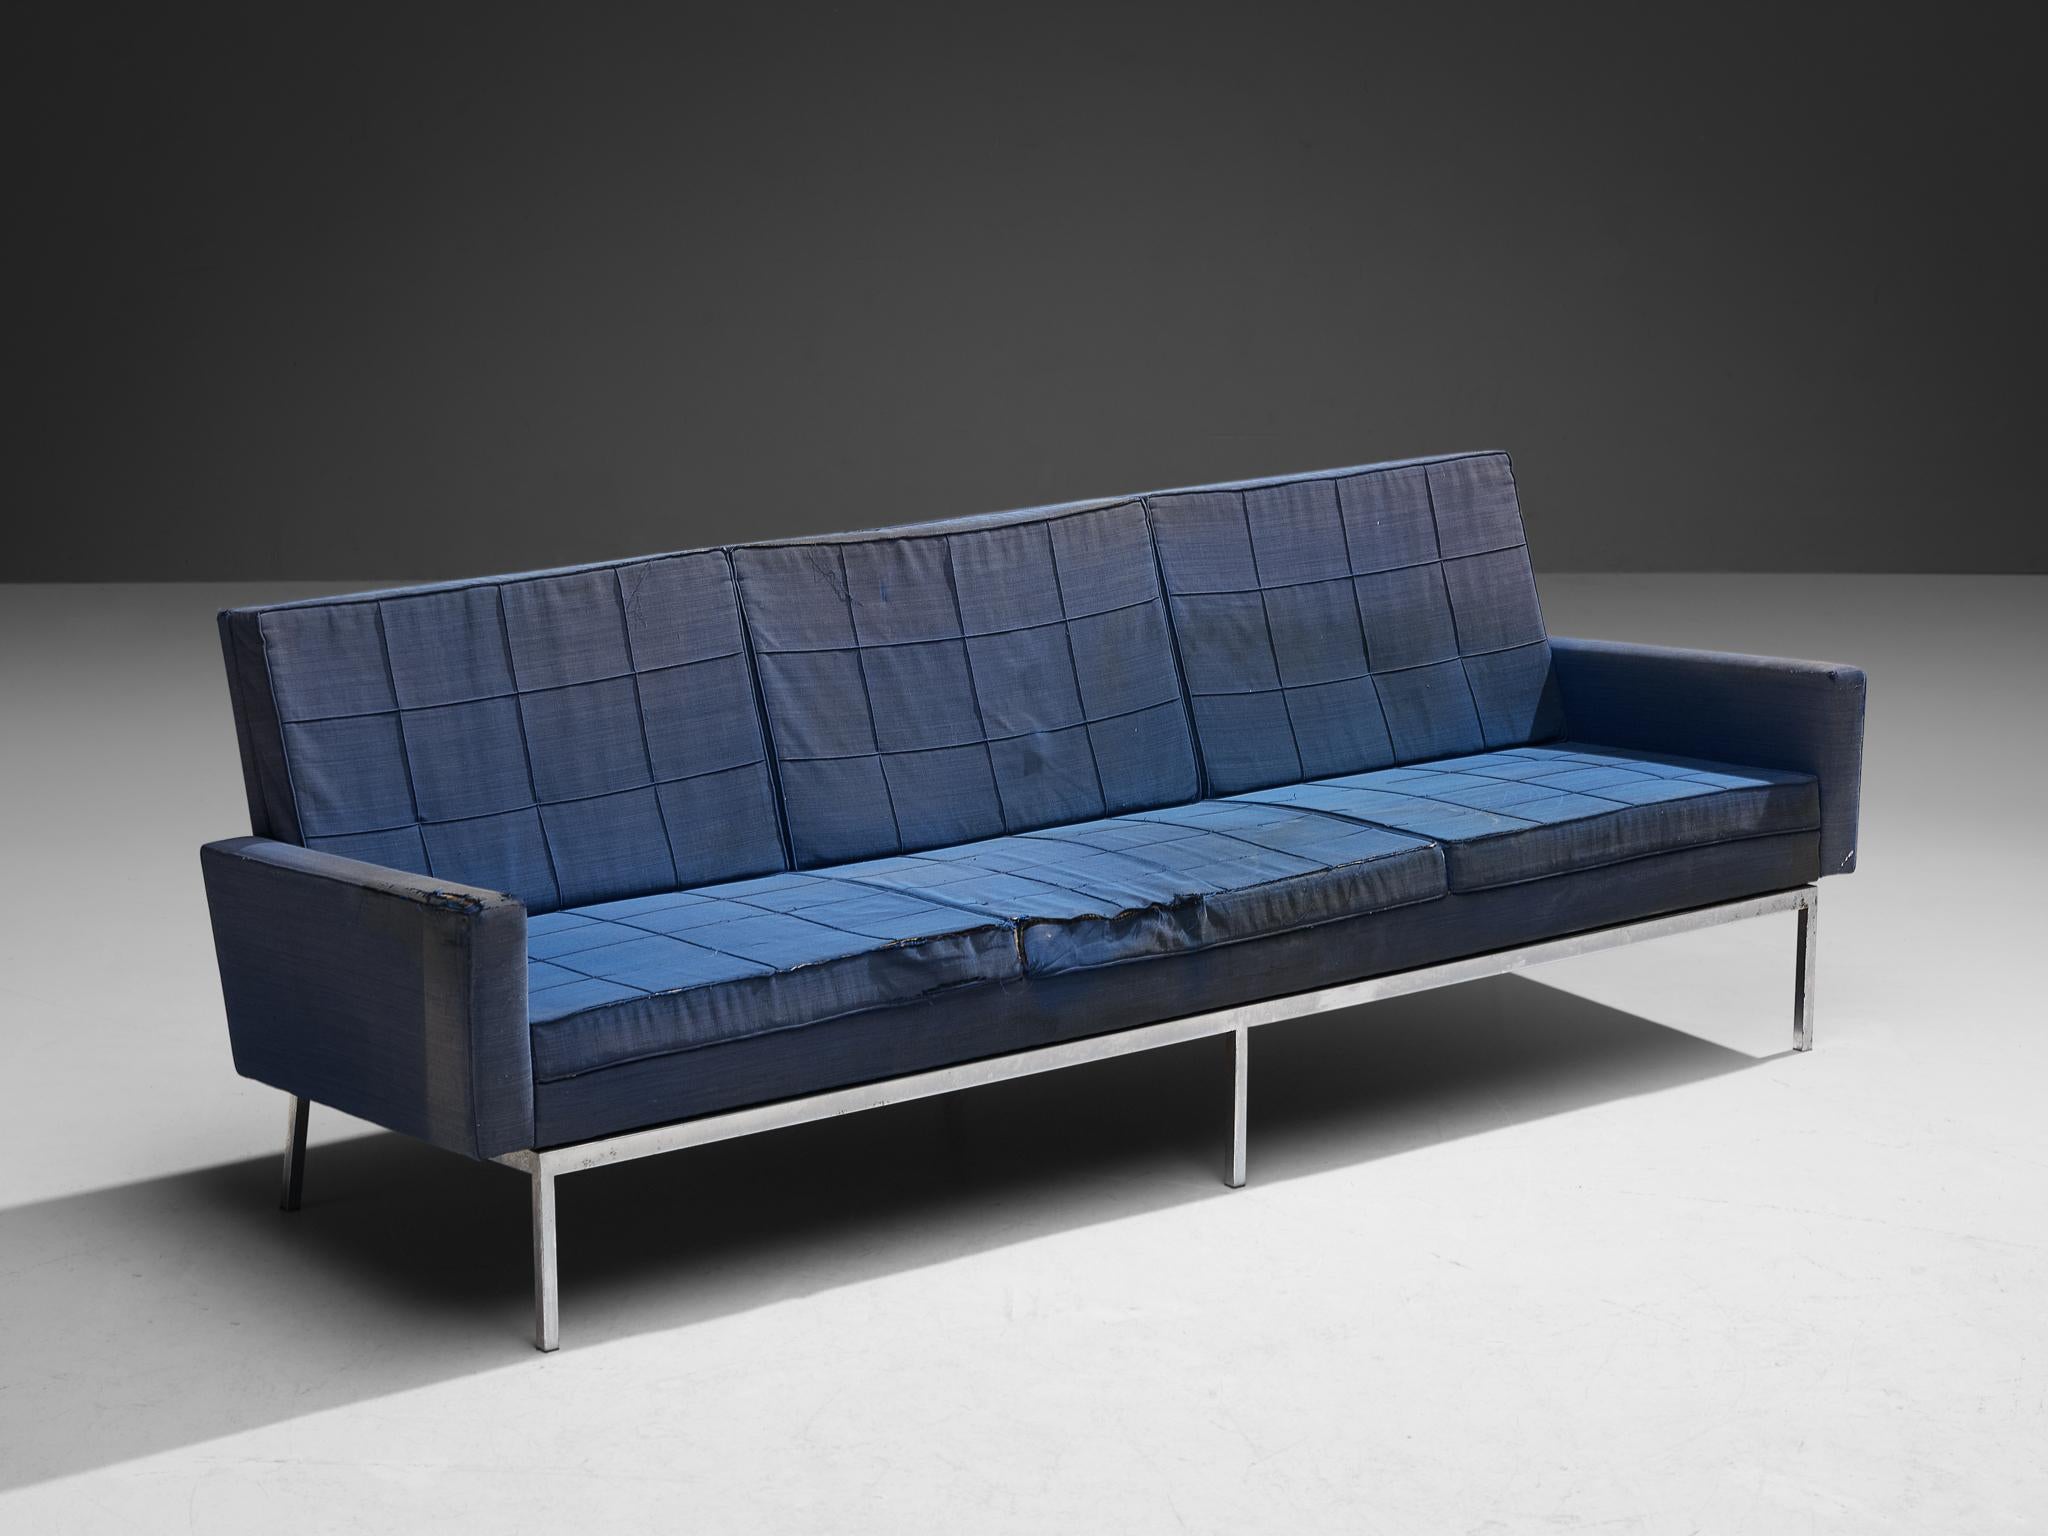 Florence Knoll for Knoll International, sofa, model '67A', steel, fabric, United States, design 1958, production 1960s/70s

This sofa model 67A is designed by Florence Knoll for Knoll International in 1958. This sofa is simplistic, yet stylish in